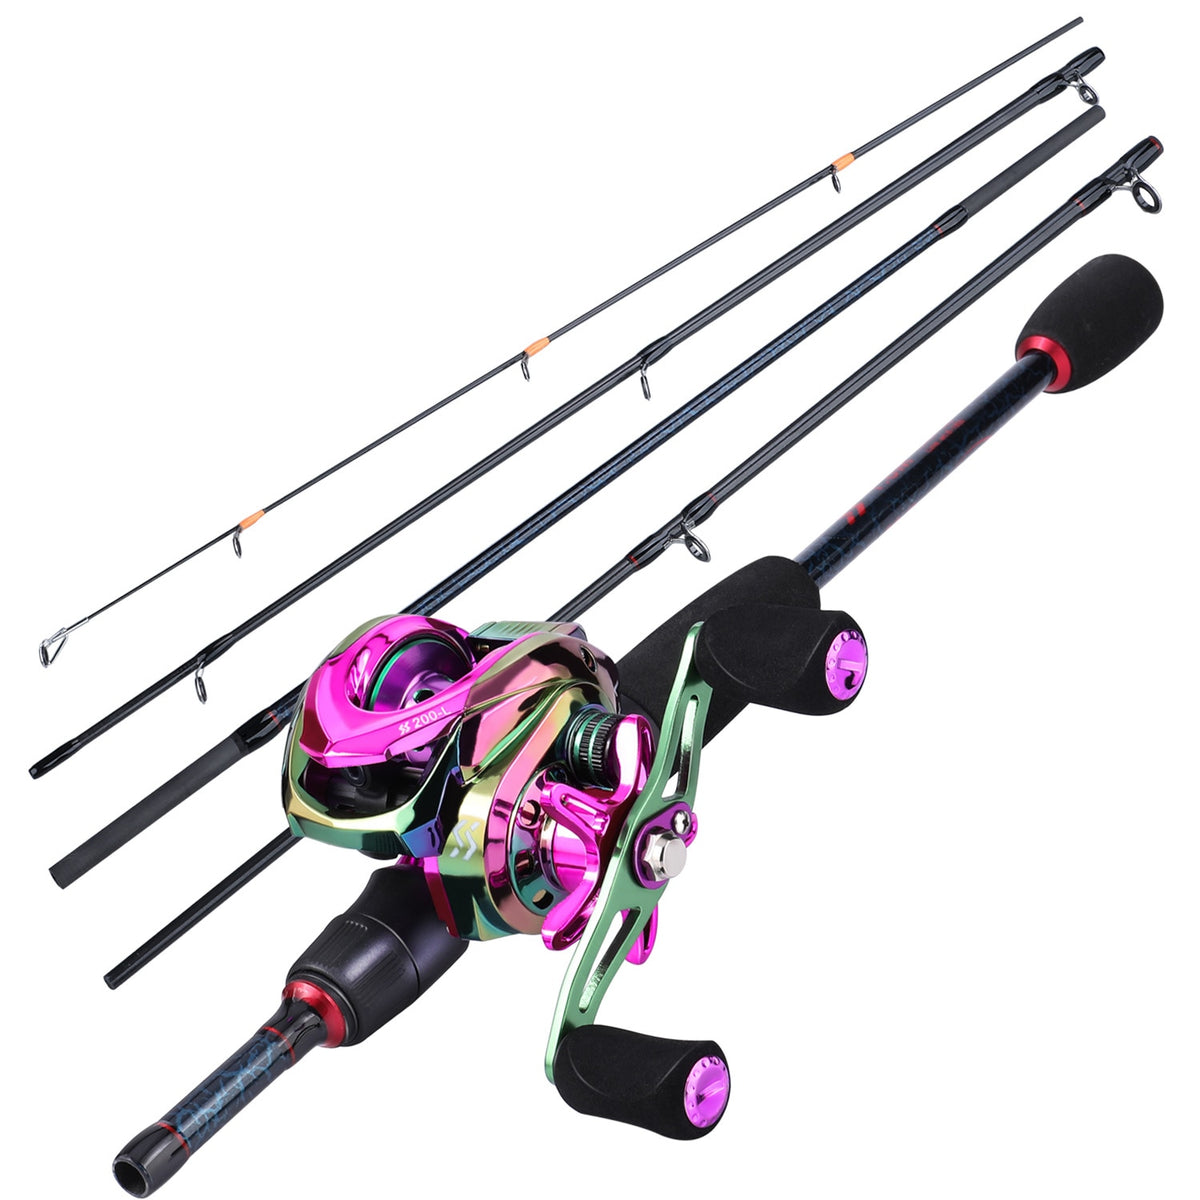 Fishing Poles Fly Fishing Rods and Reels 5-Sections Carbon Rod 5/6 Reels  for Trout Perch Fishing Suitable for Leisure Fishing Fishing Rod and Reel